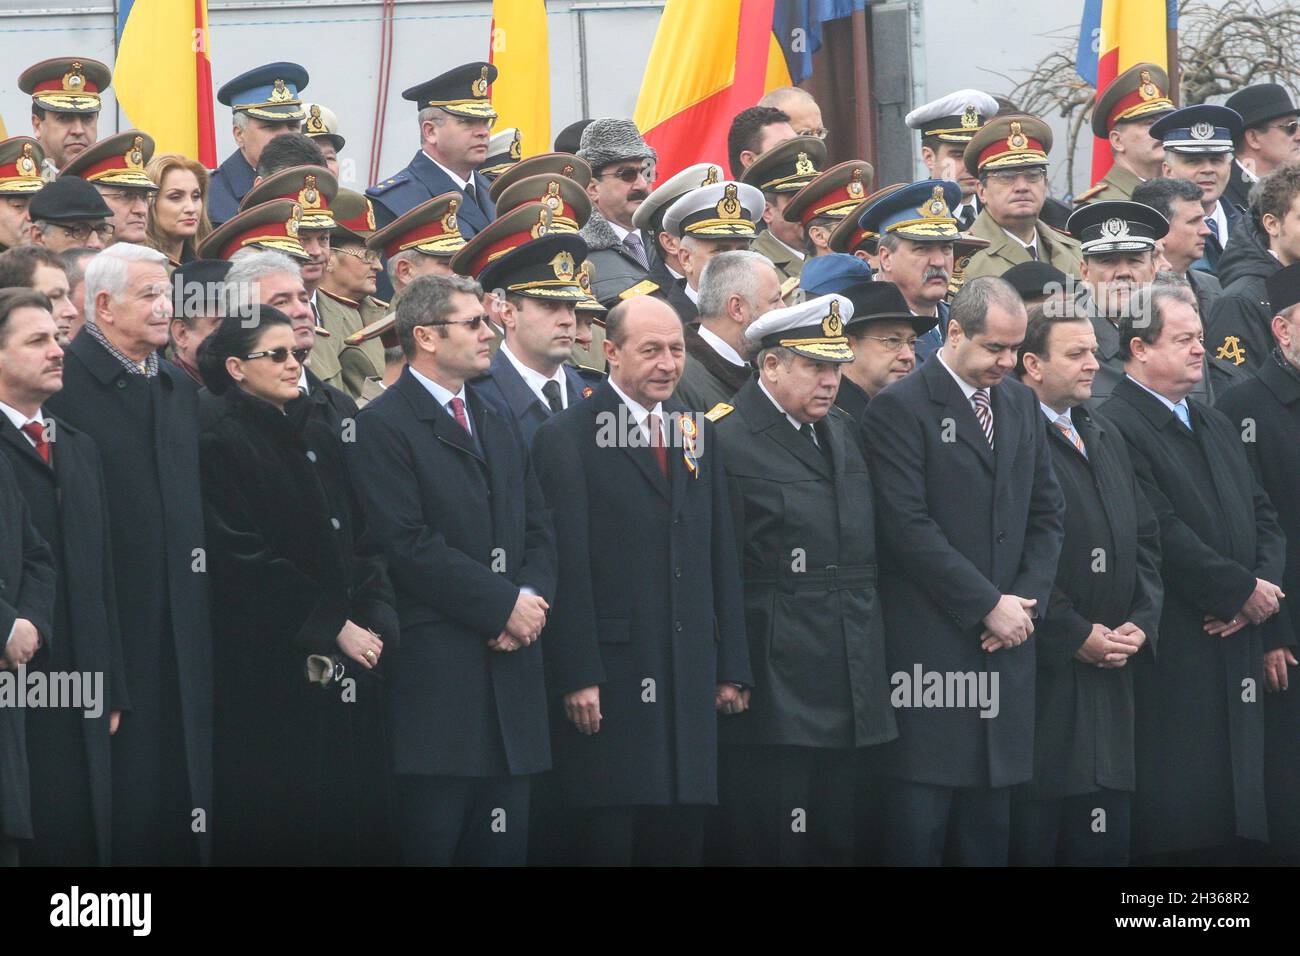 BUCHAREST, ROMANIA - DECEMBER 1, 2009: Romanian president Traian Basescu and other officials are taking part to a military parade on National Day of R Stock Photo